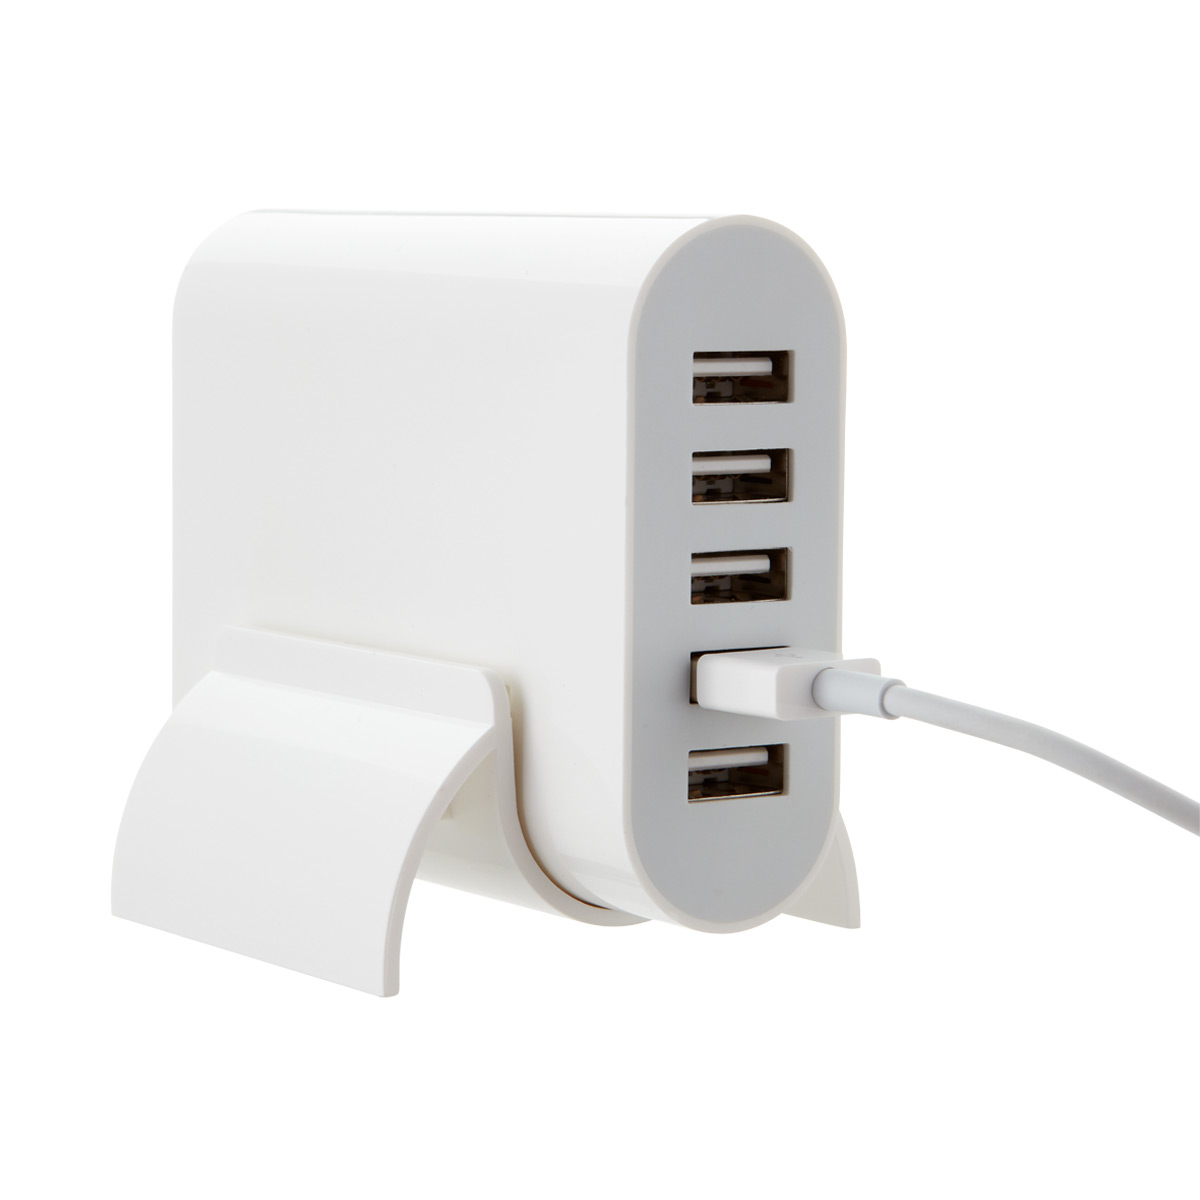 5-Port USB Charging Hub | The Container Store